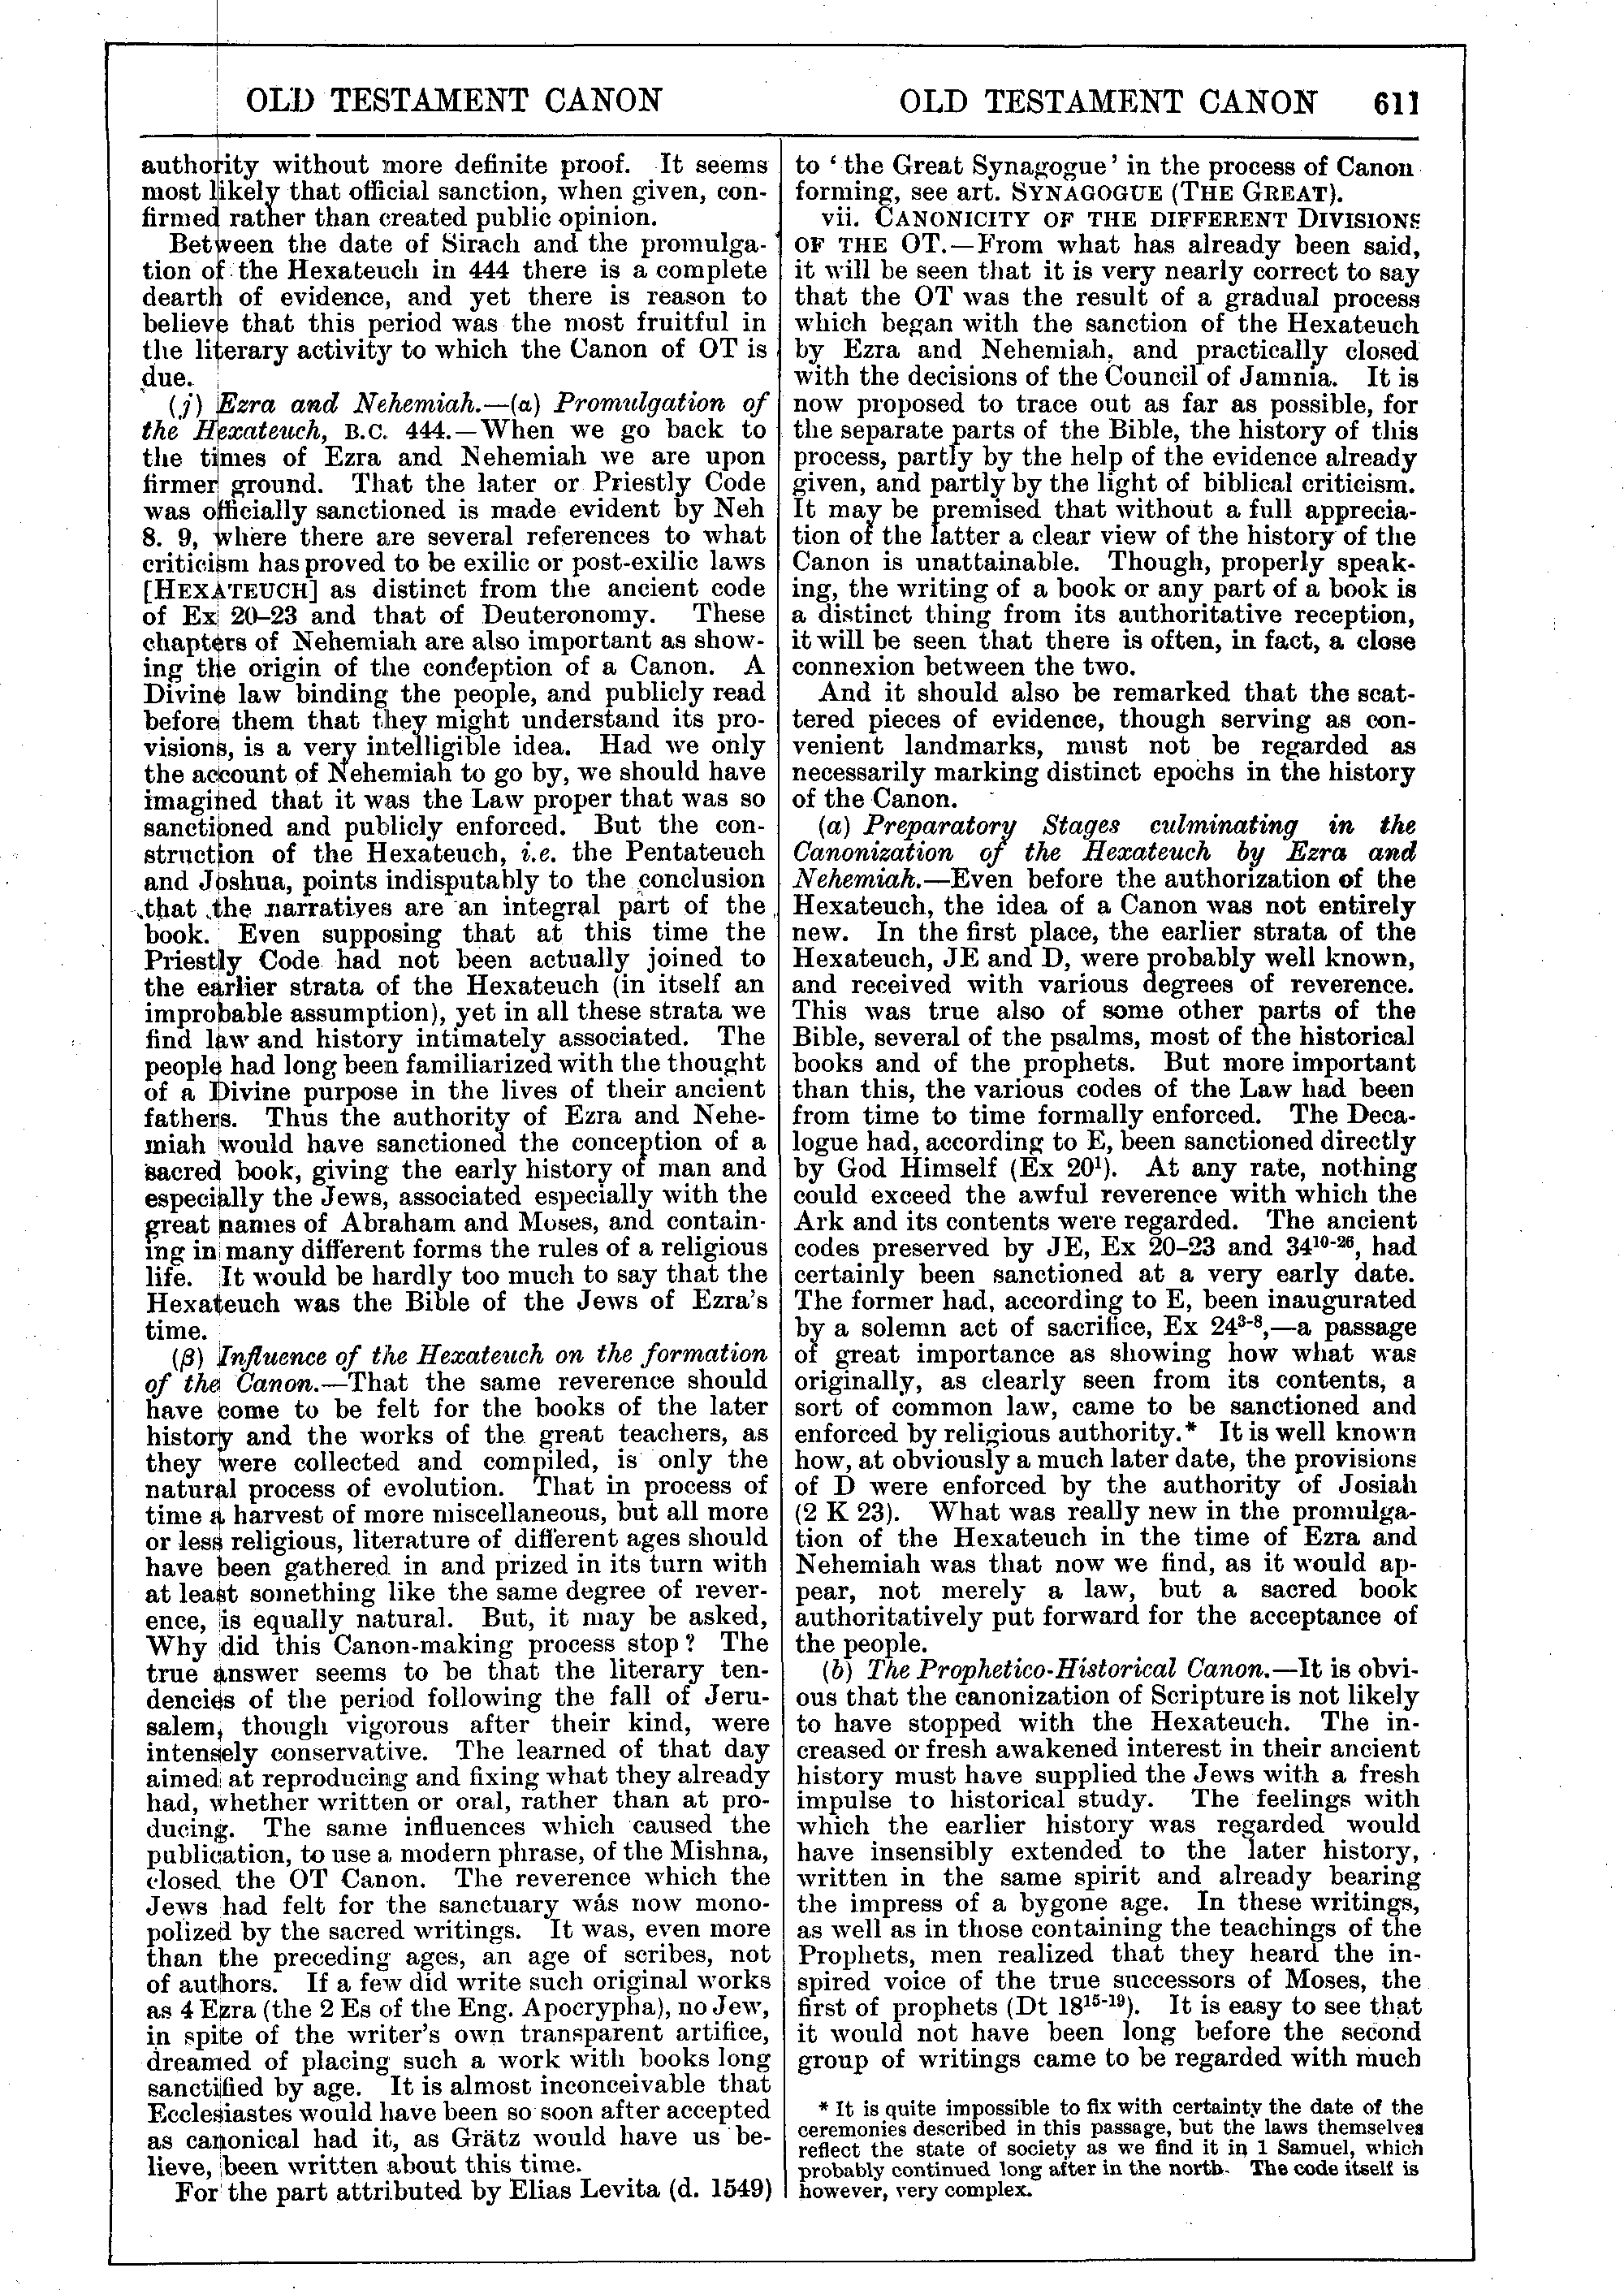 Image of page 611